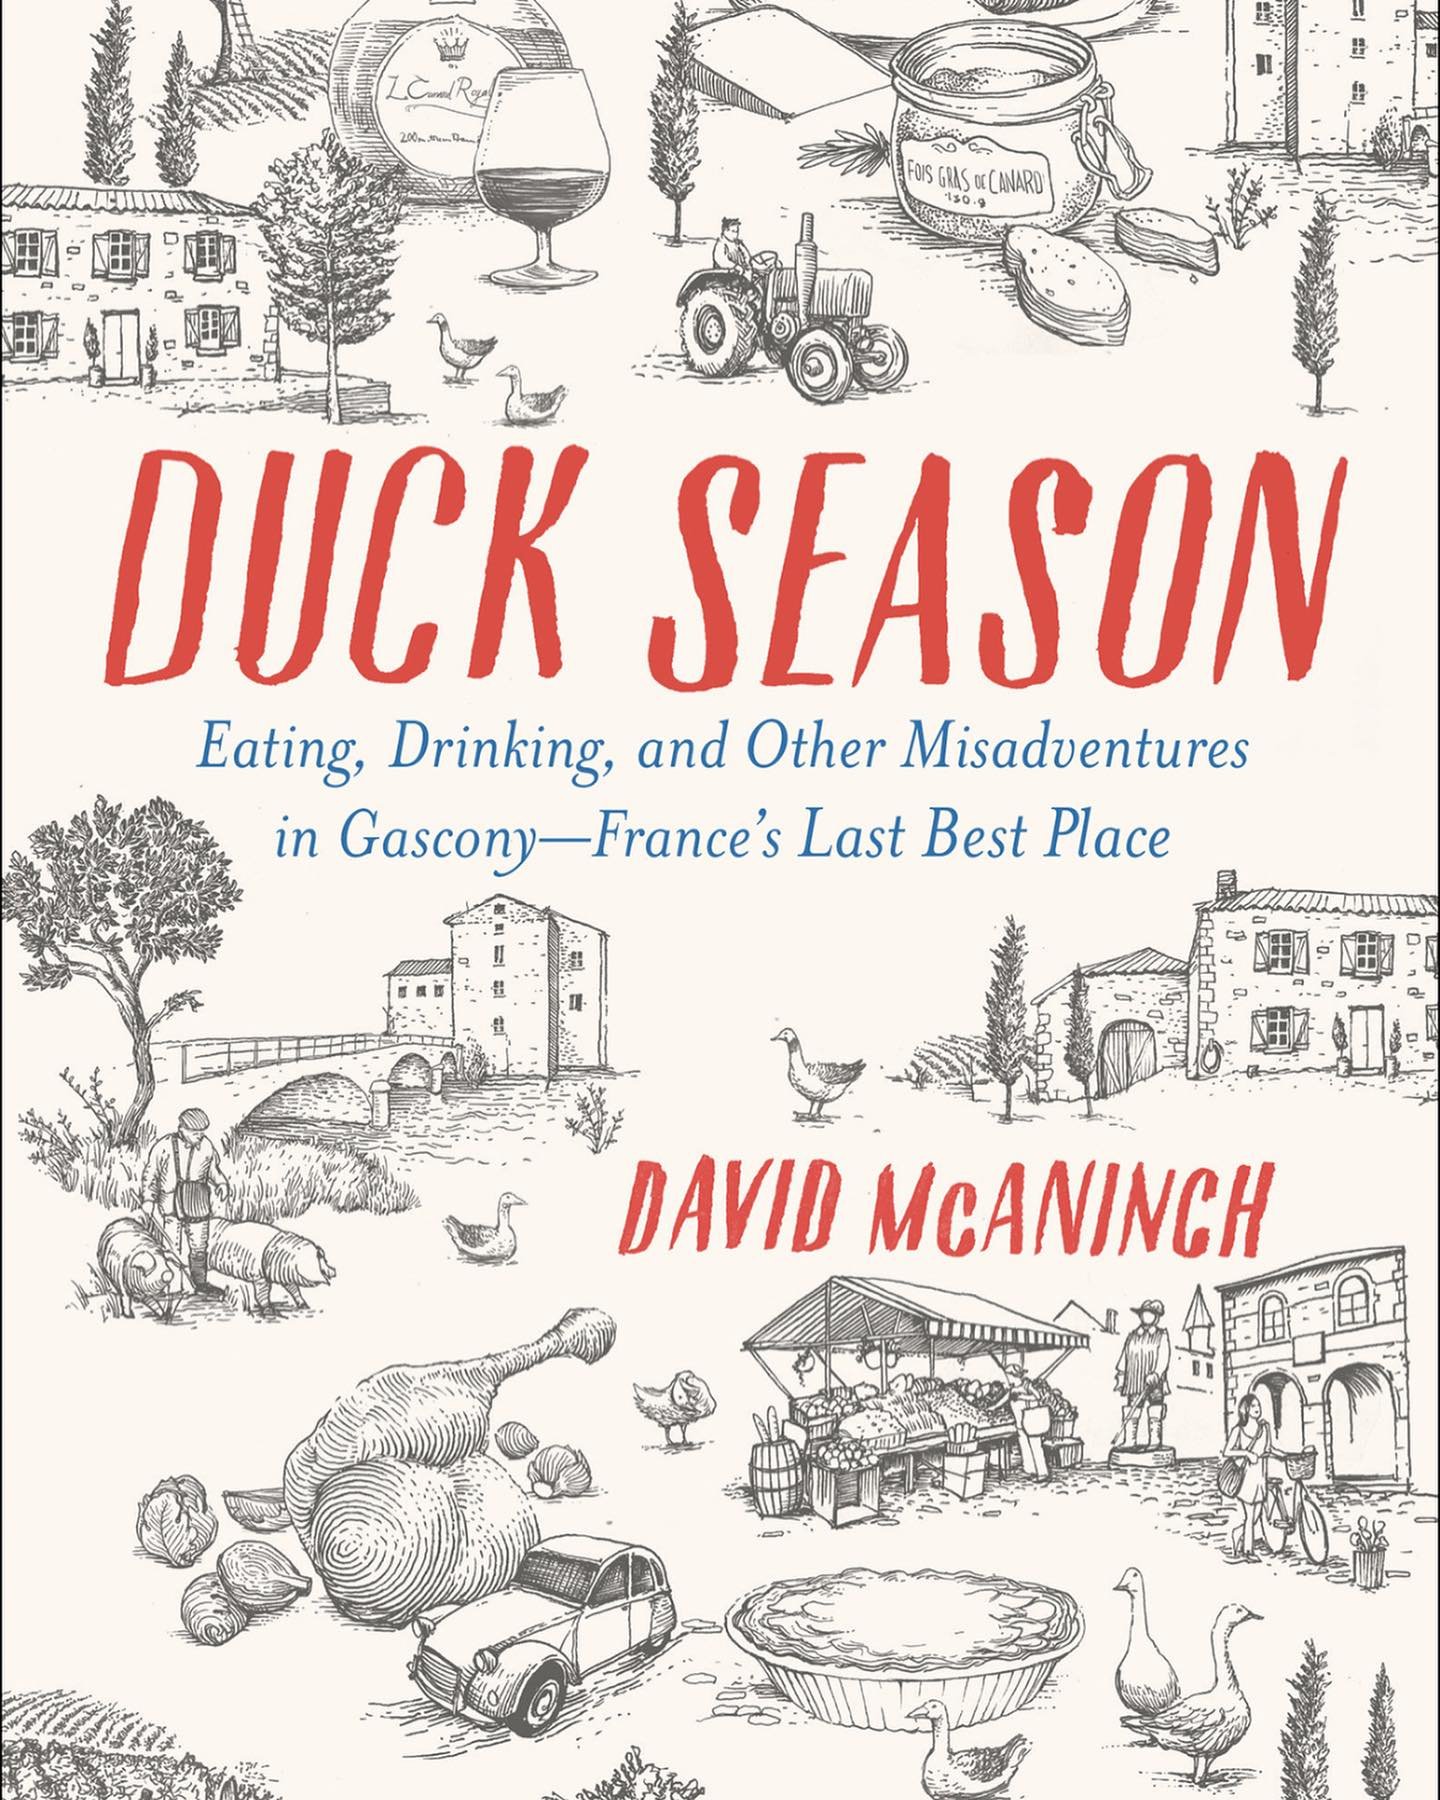 In preparation for our French holiday I&rsquo;m reading Duck Season by David McAninch, to learn more about life in Gascony and @gersledepartement 
Duck Season takes me back to my childhood watching Bugs Bunny cartoons #bugsbunny #cooking #frenchcooki